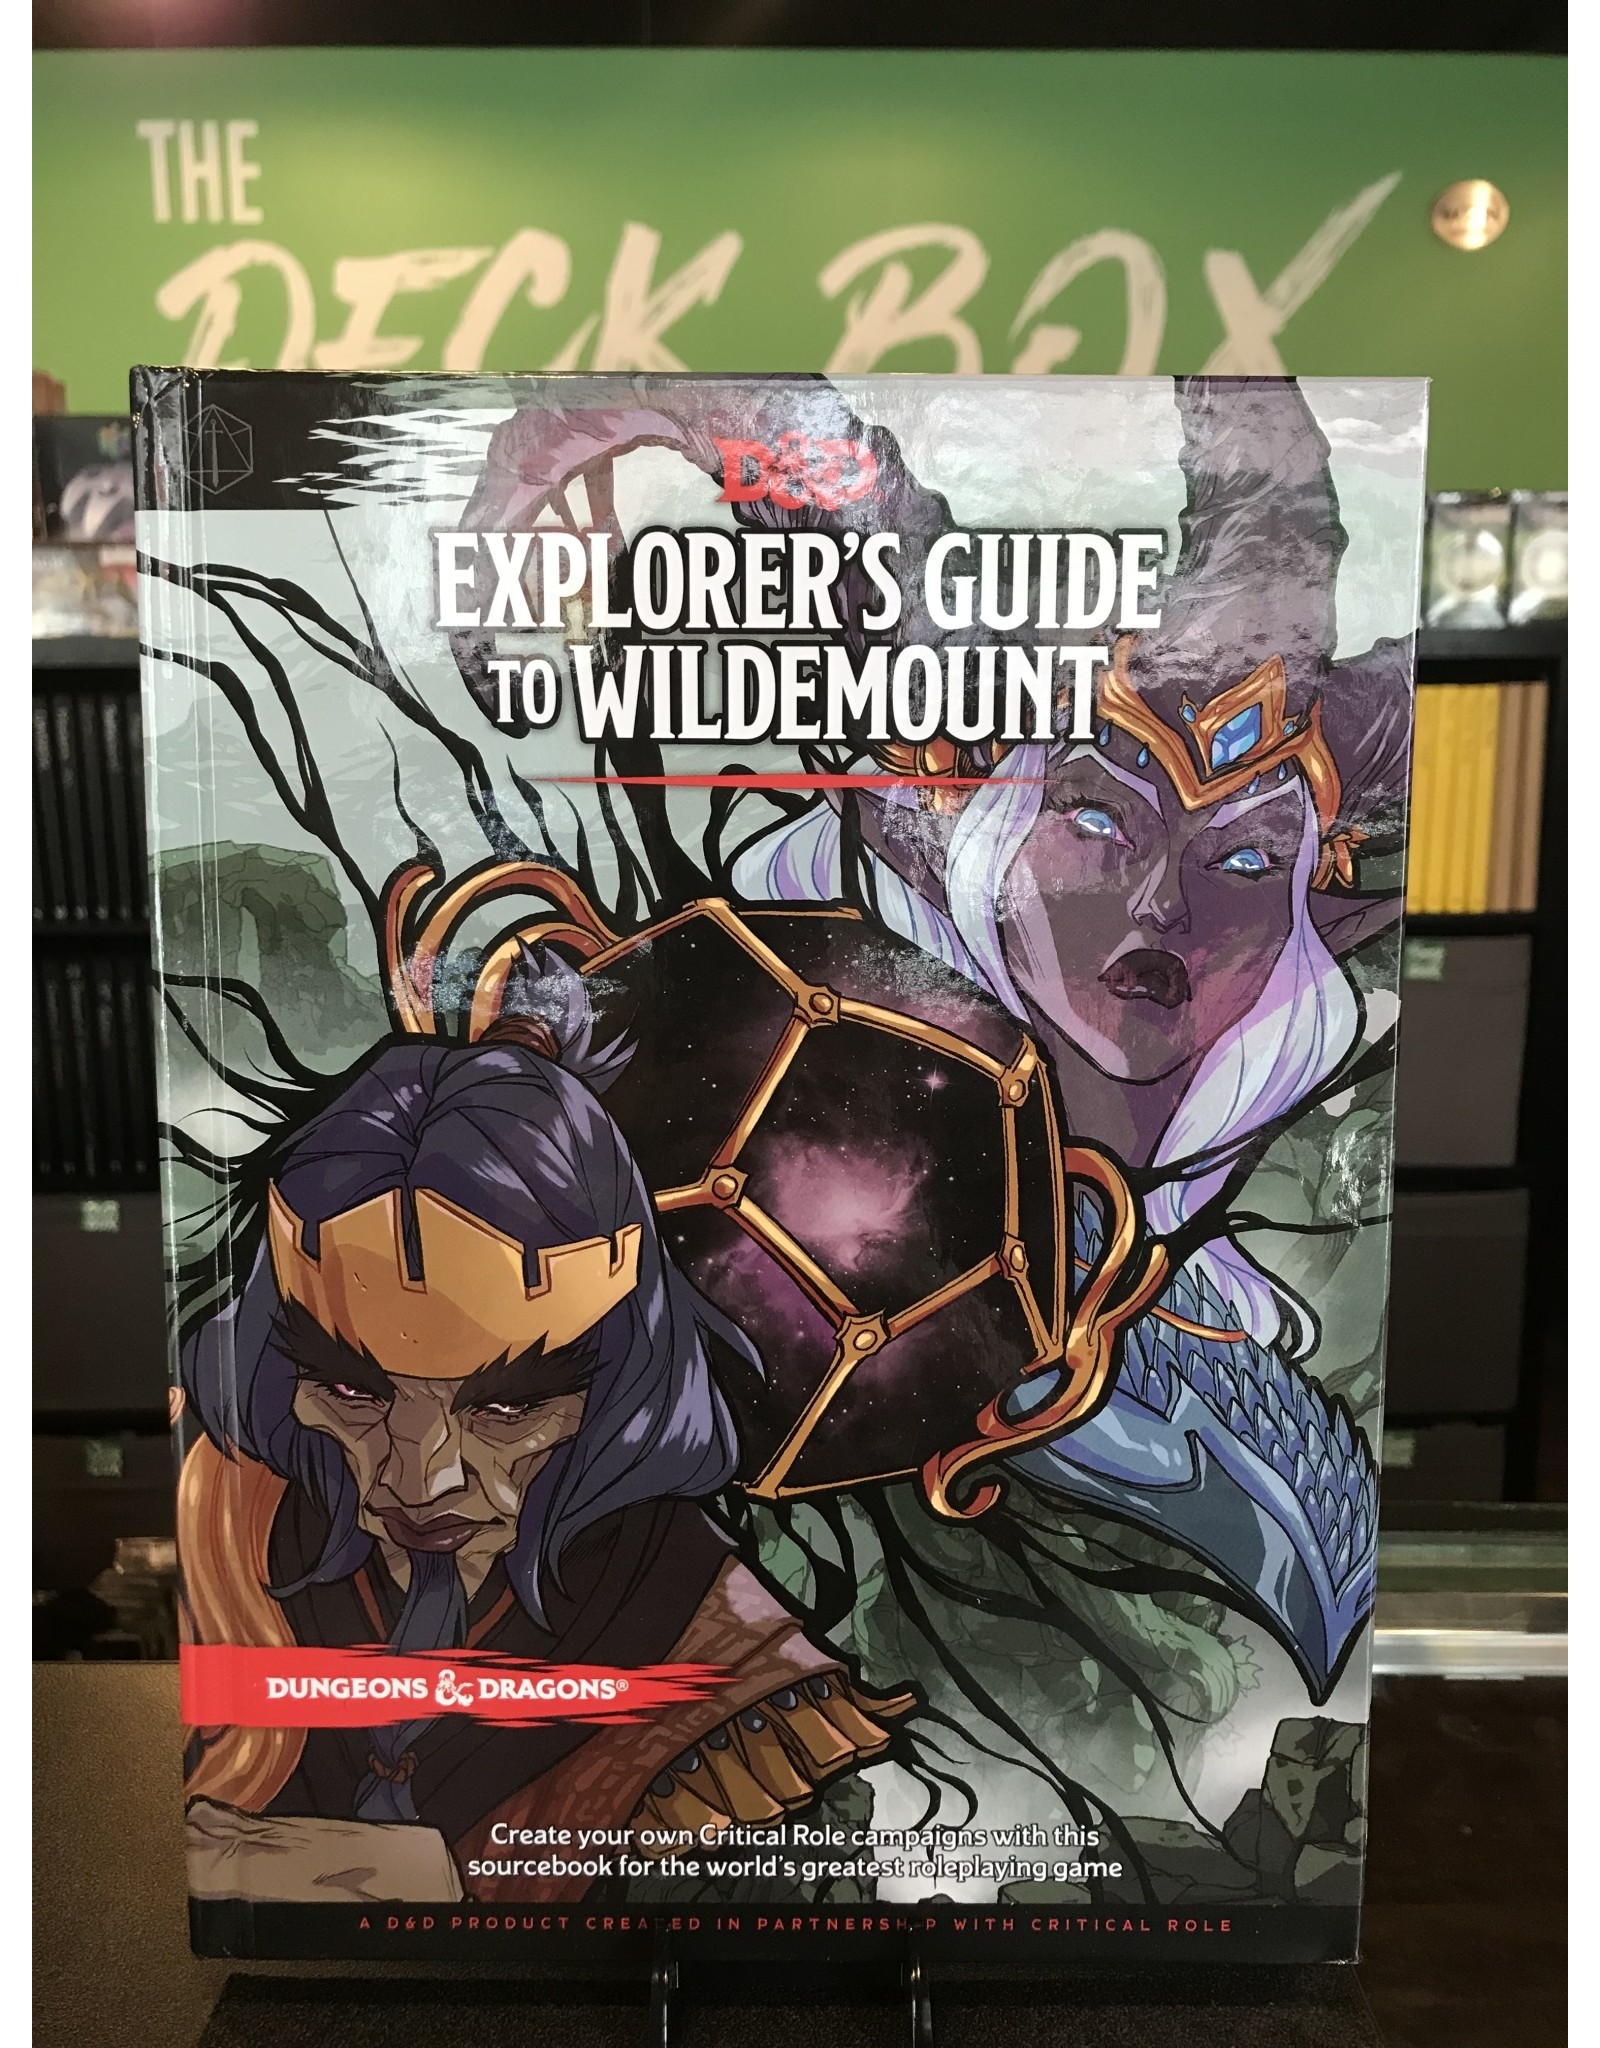 Dungeons & Dragons DND 5E EXPLORER'S GUIDE TO WILDEMOUNT